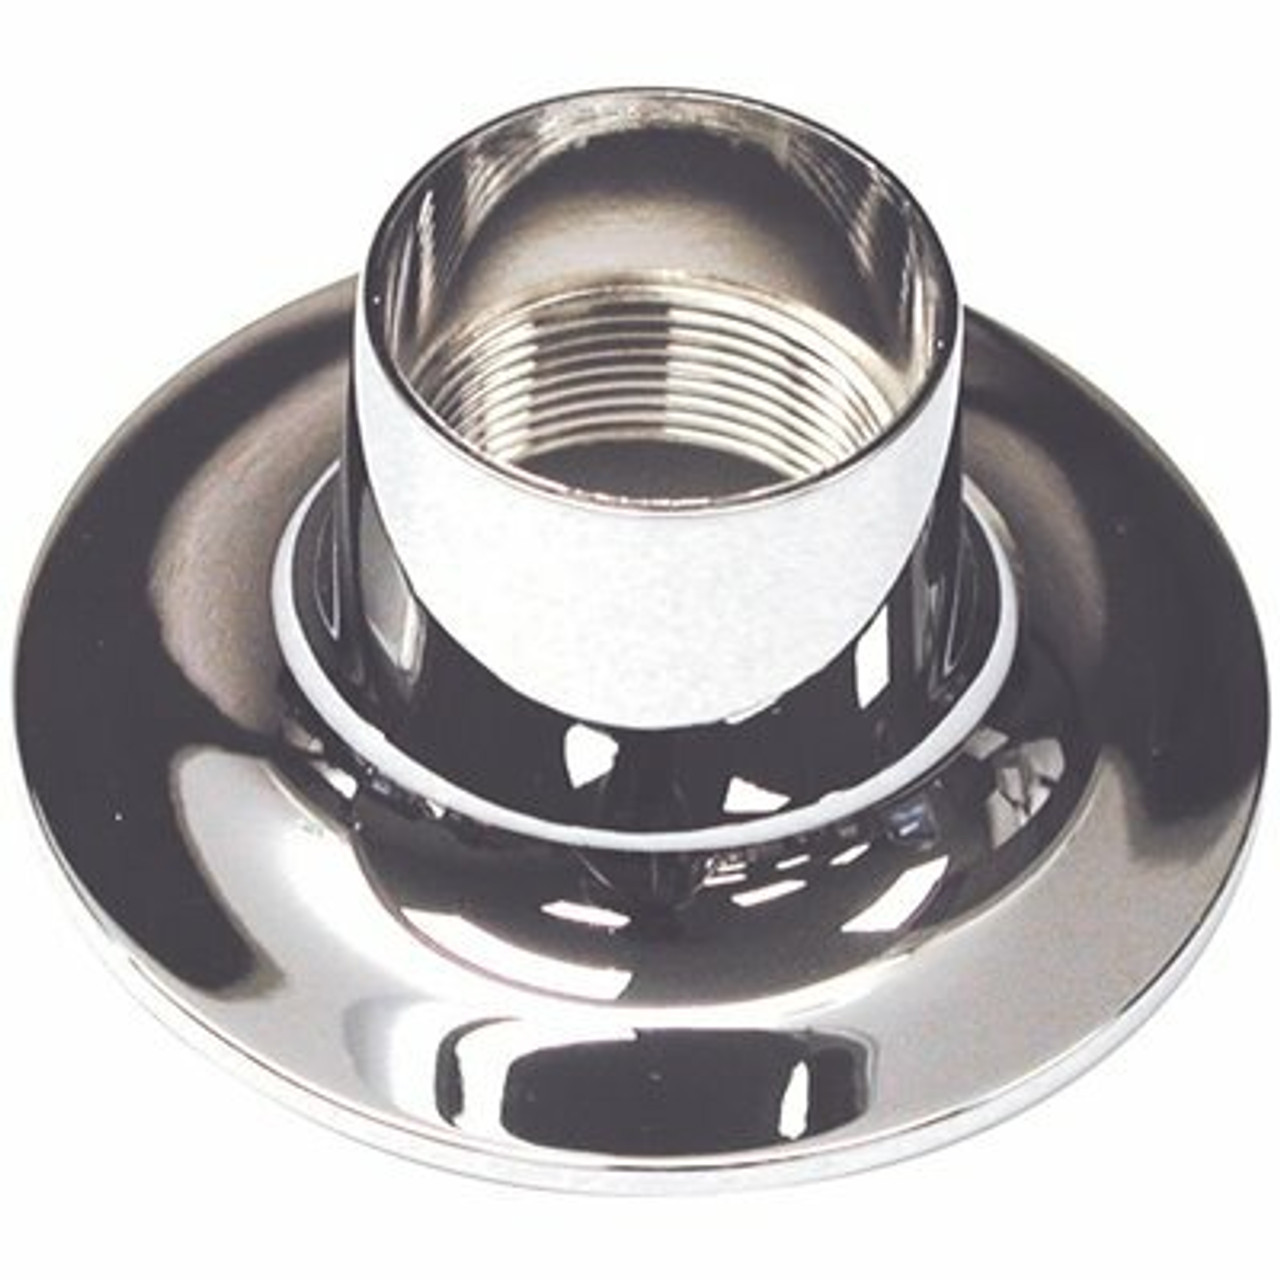 Danco 1-1/8 In. Metal Flange For Price Pfister Lavatory Faucets